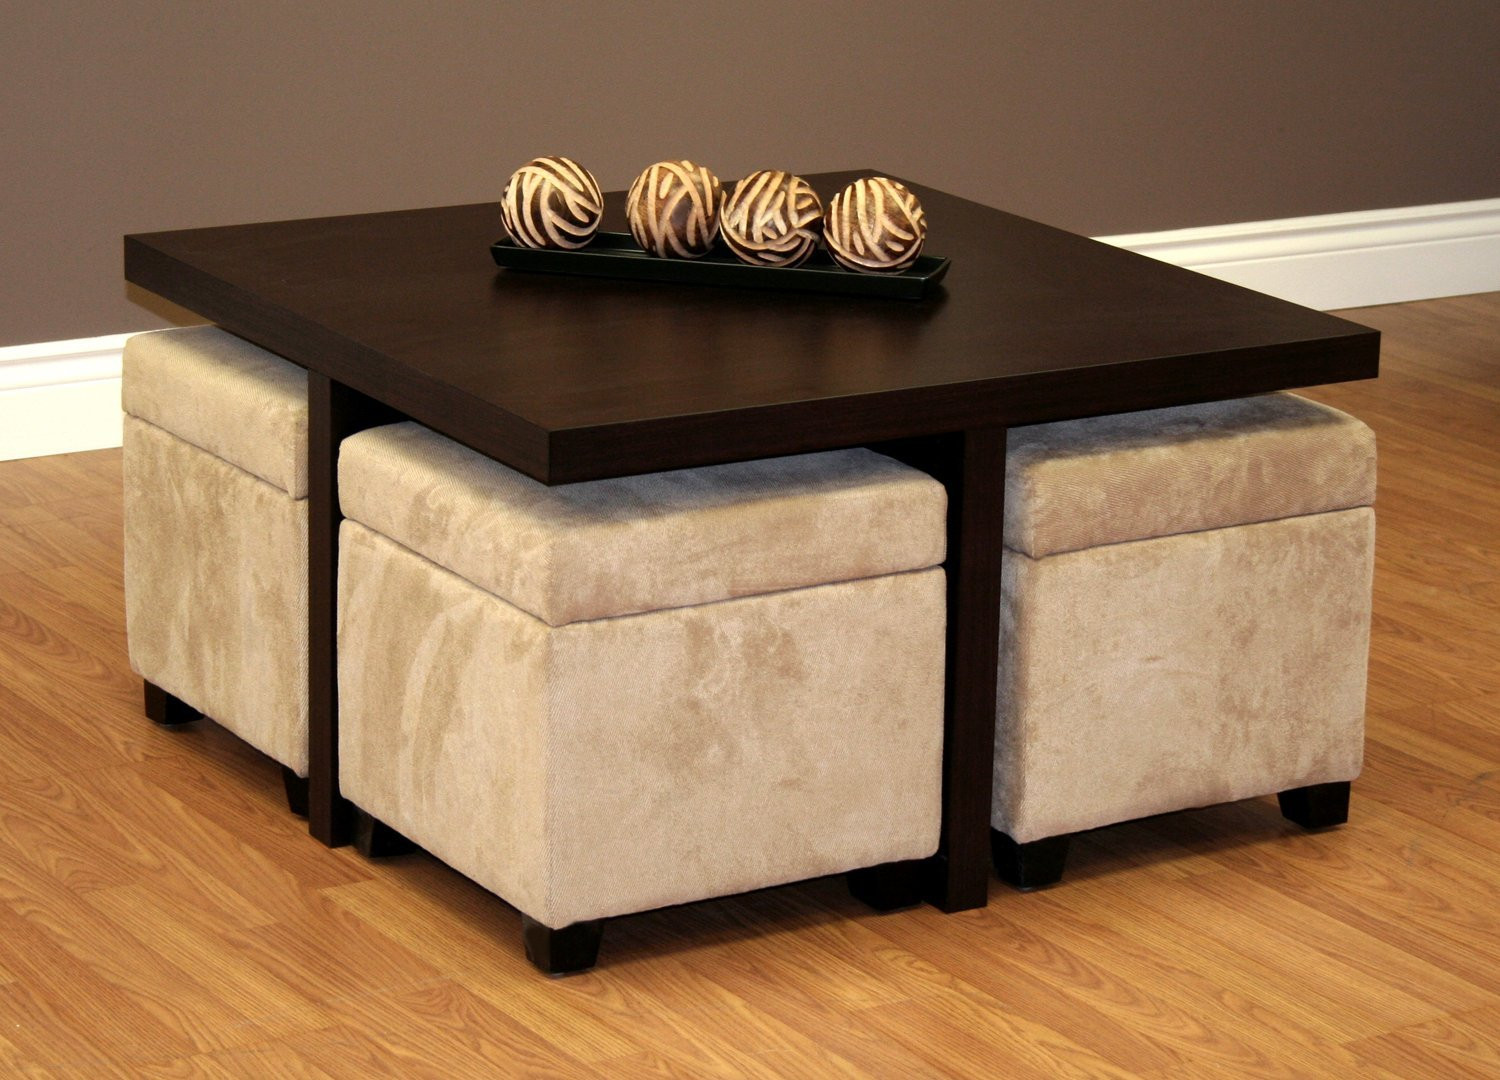 Middle Table Living Room
 Good Softy Coffee Table Ottoman With Amazing Design For